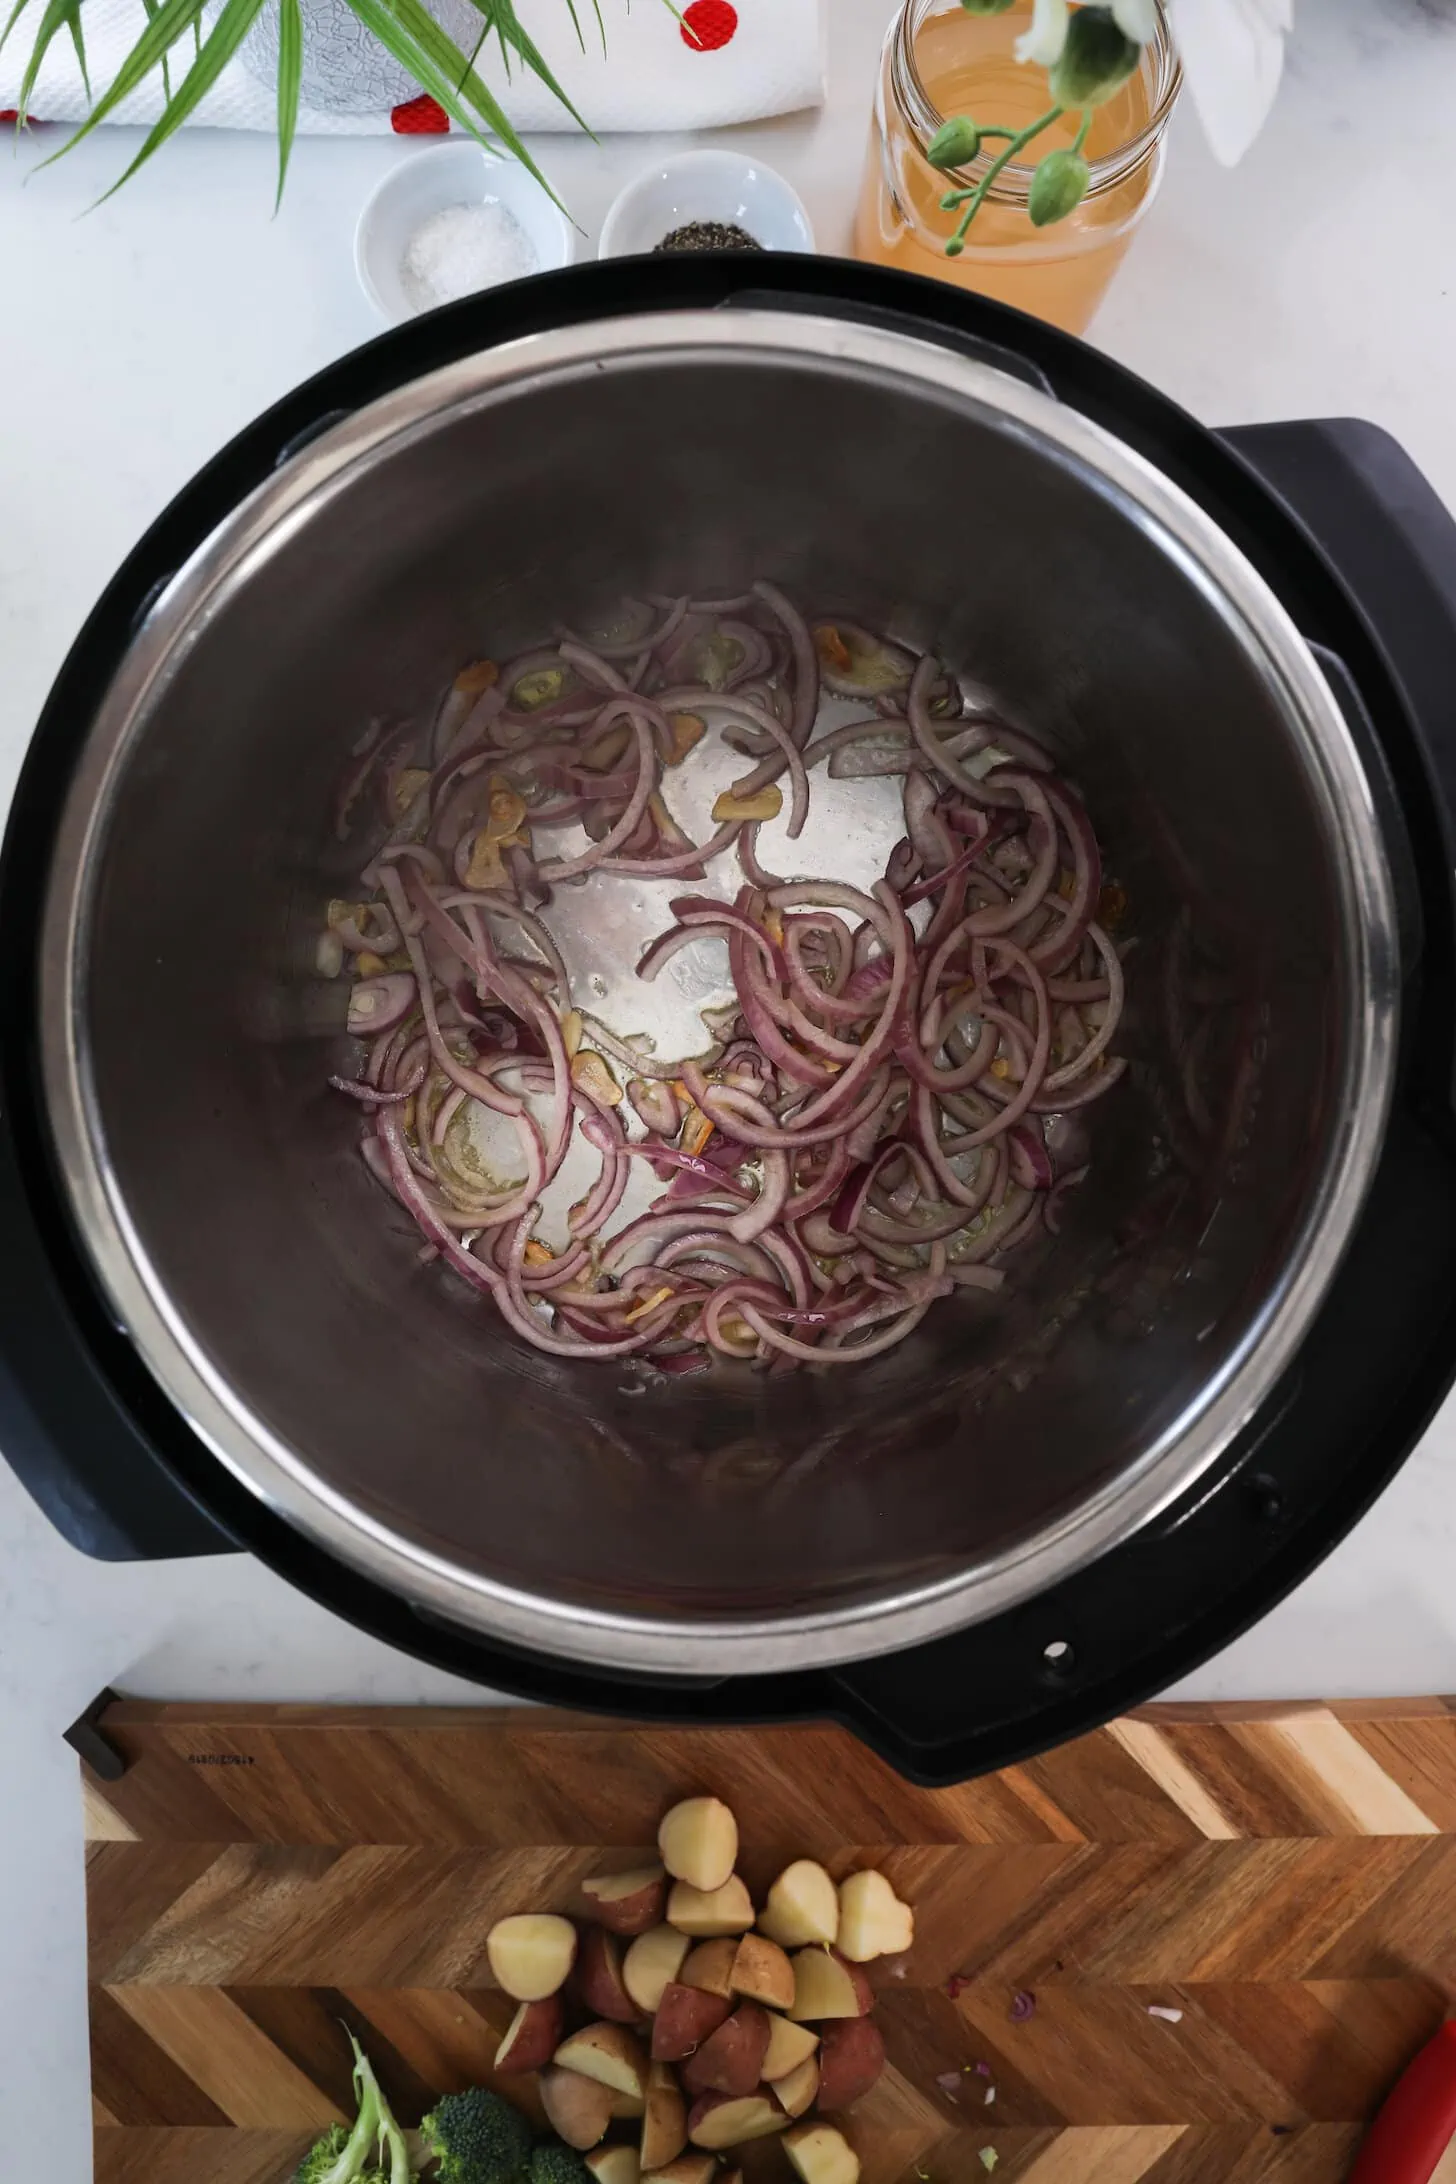 Birdseye view of Instant pot with red onion slices frying in oil.